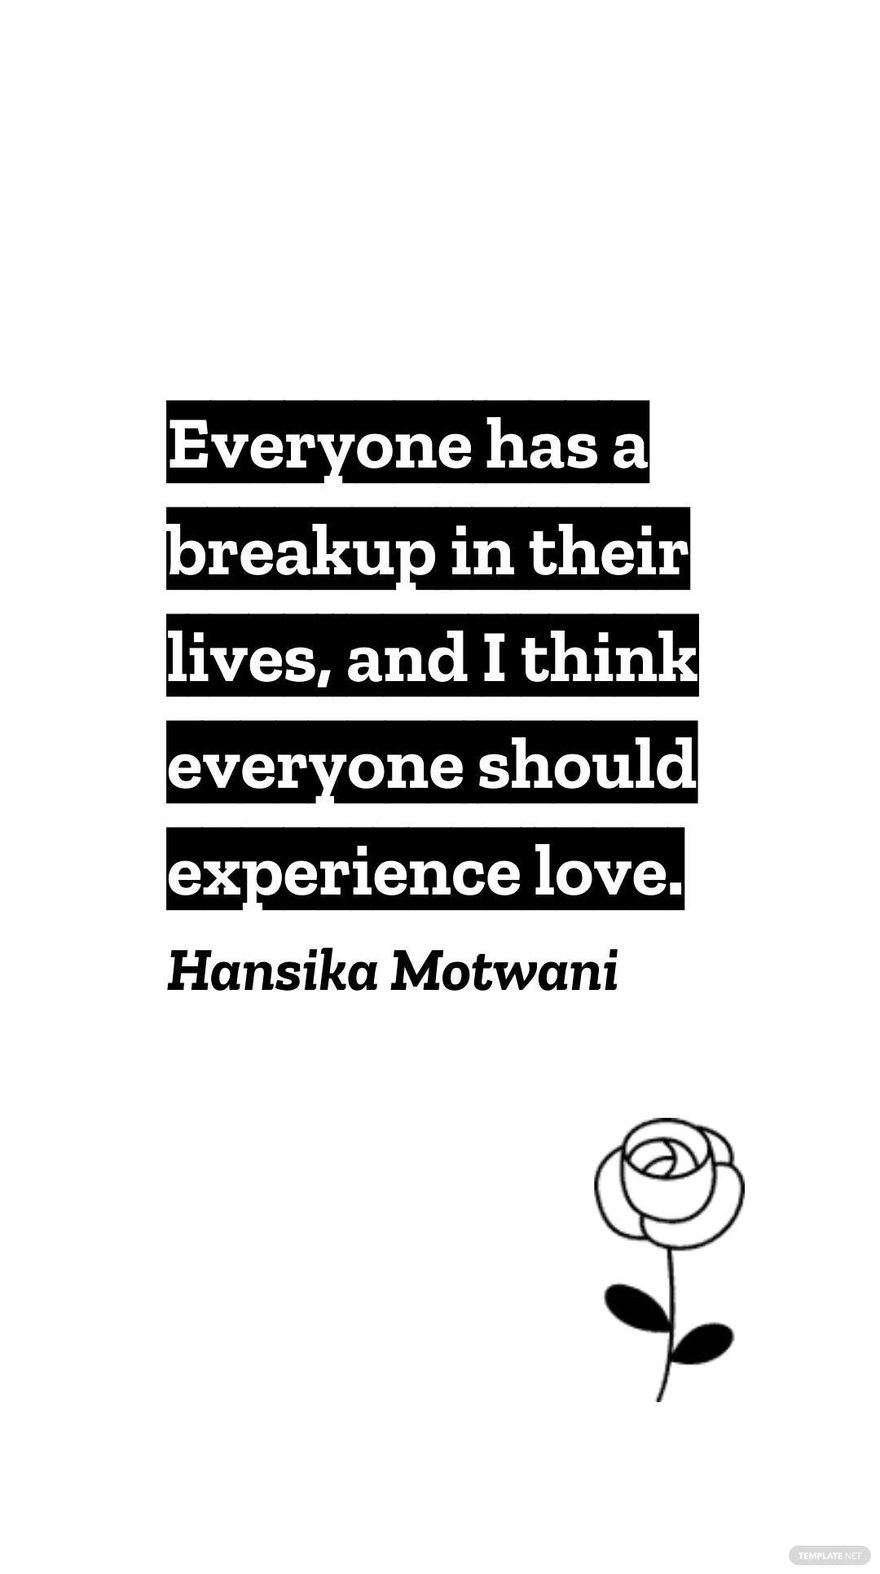 Hansika Motwani - Everyone has a breakup in their lives, and I think everyone should experience love.